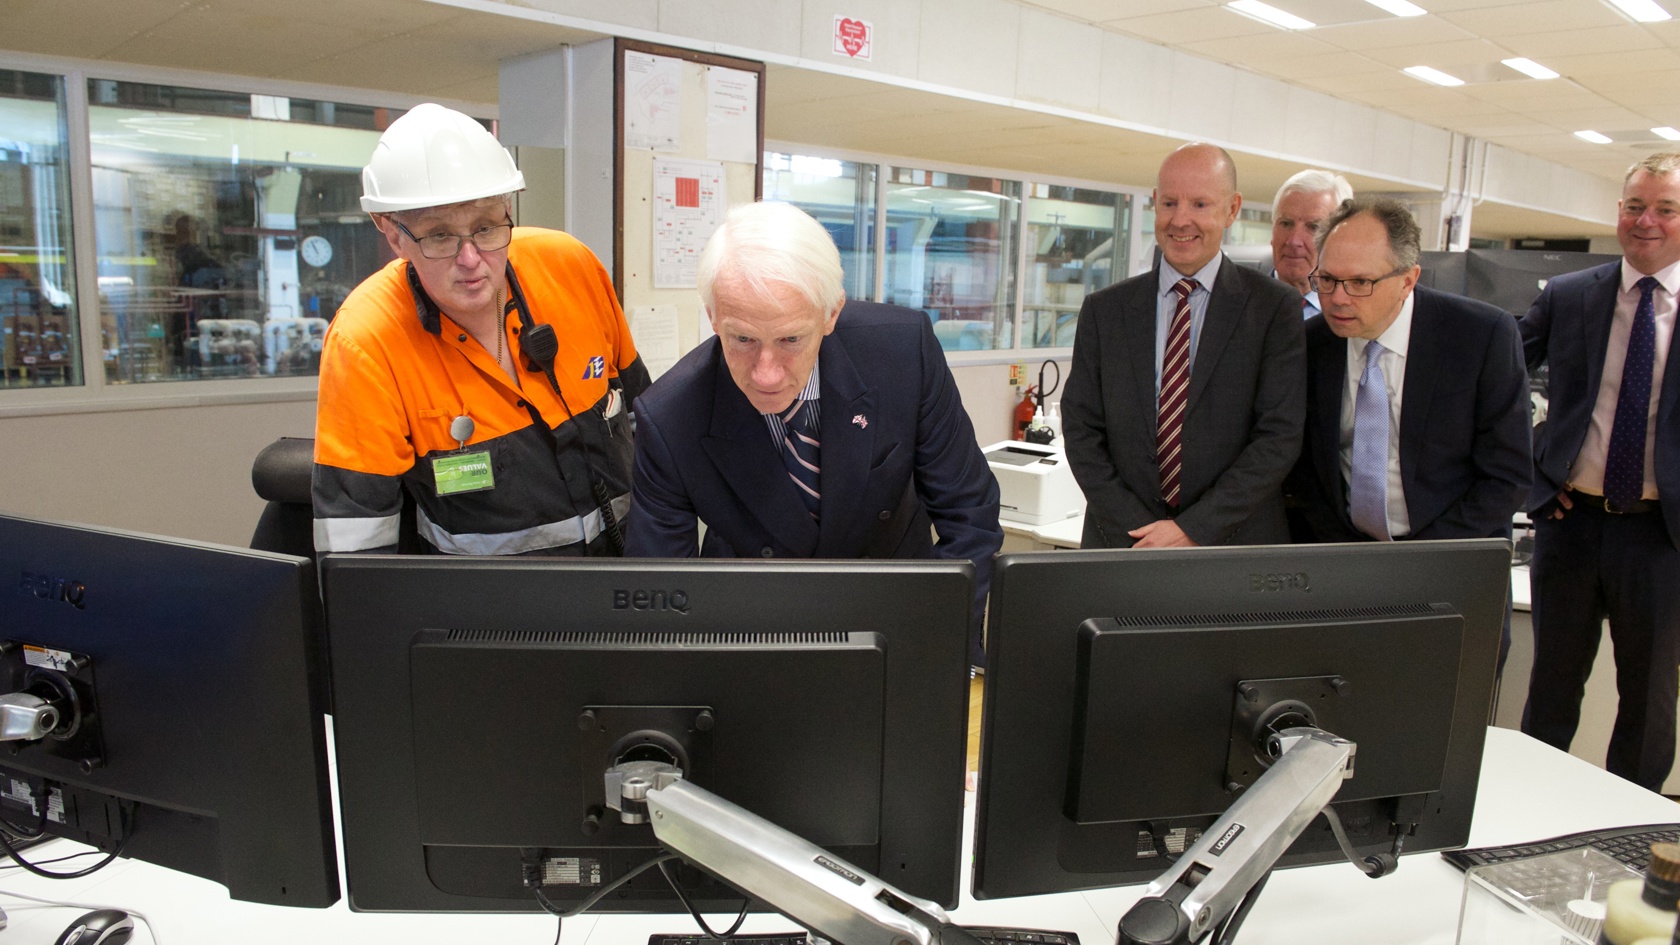 Engineer shows Lieutenant Governor computer systems at La Collette power station